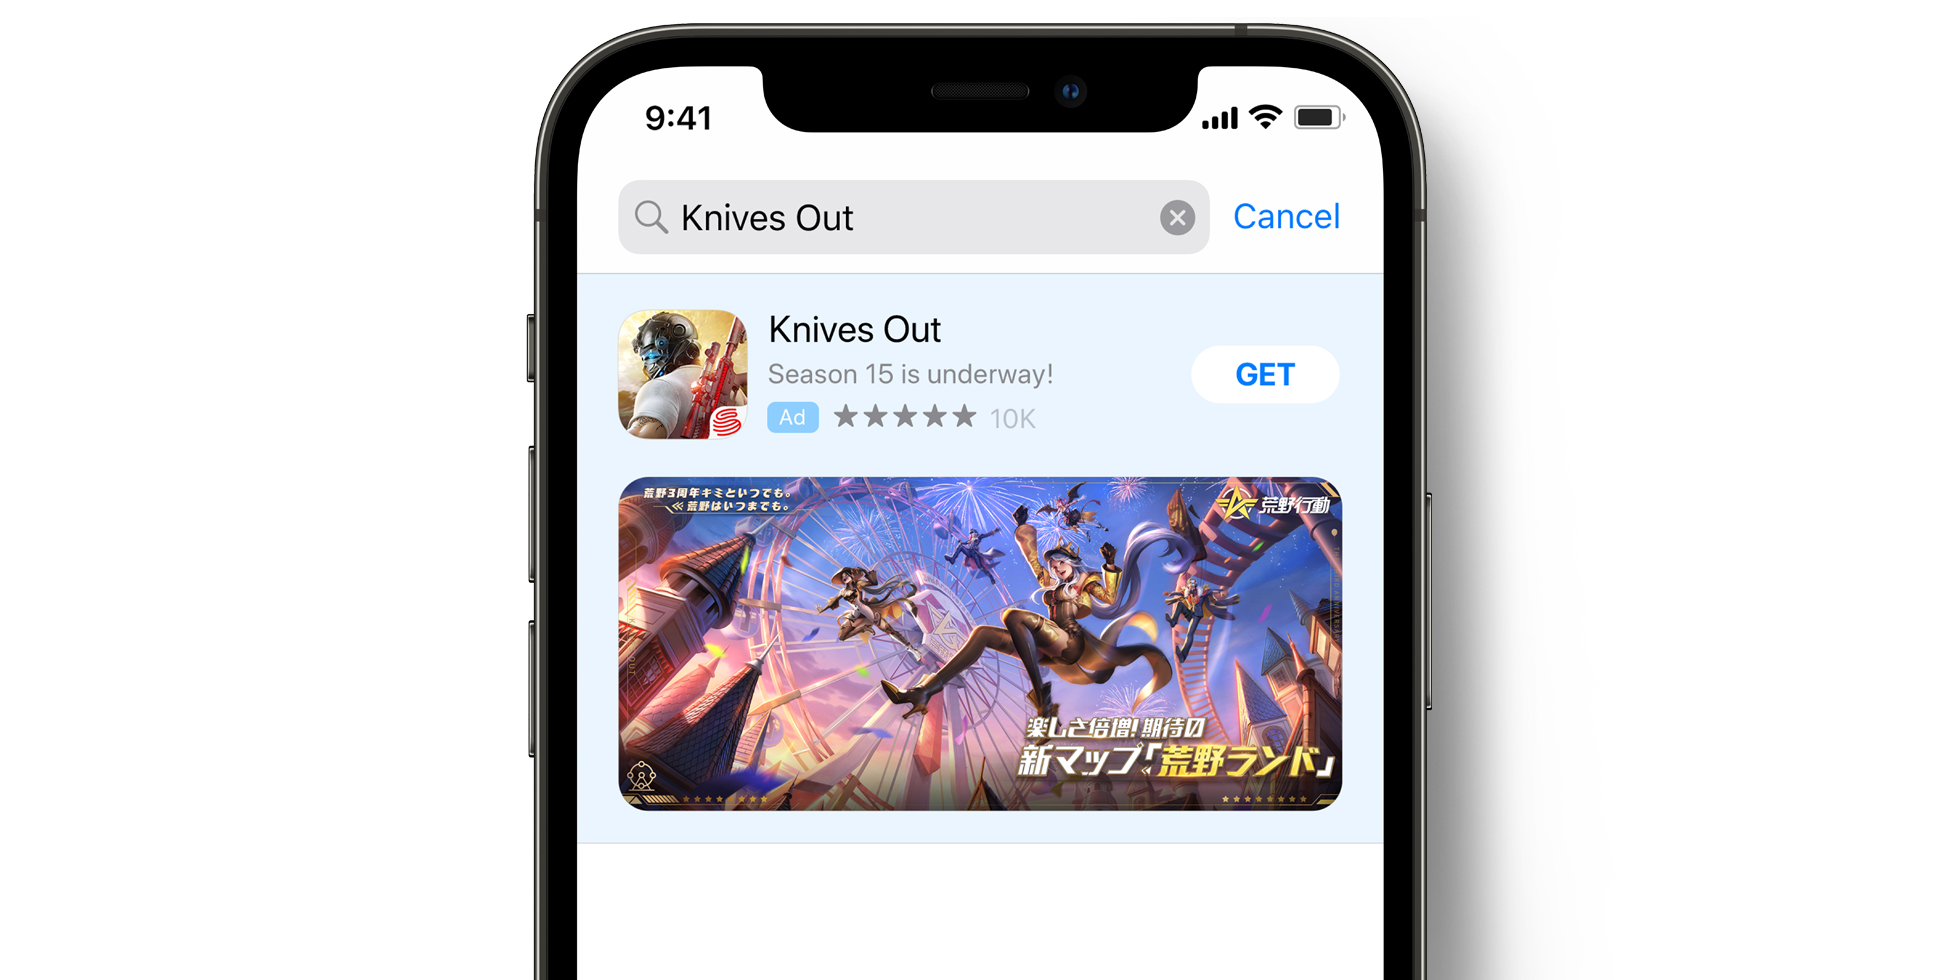 App Store 上的 Knives Out 广告